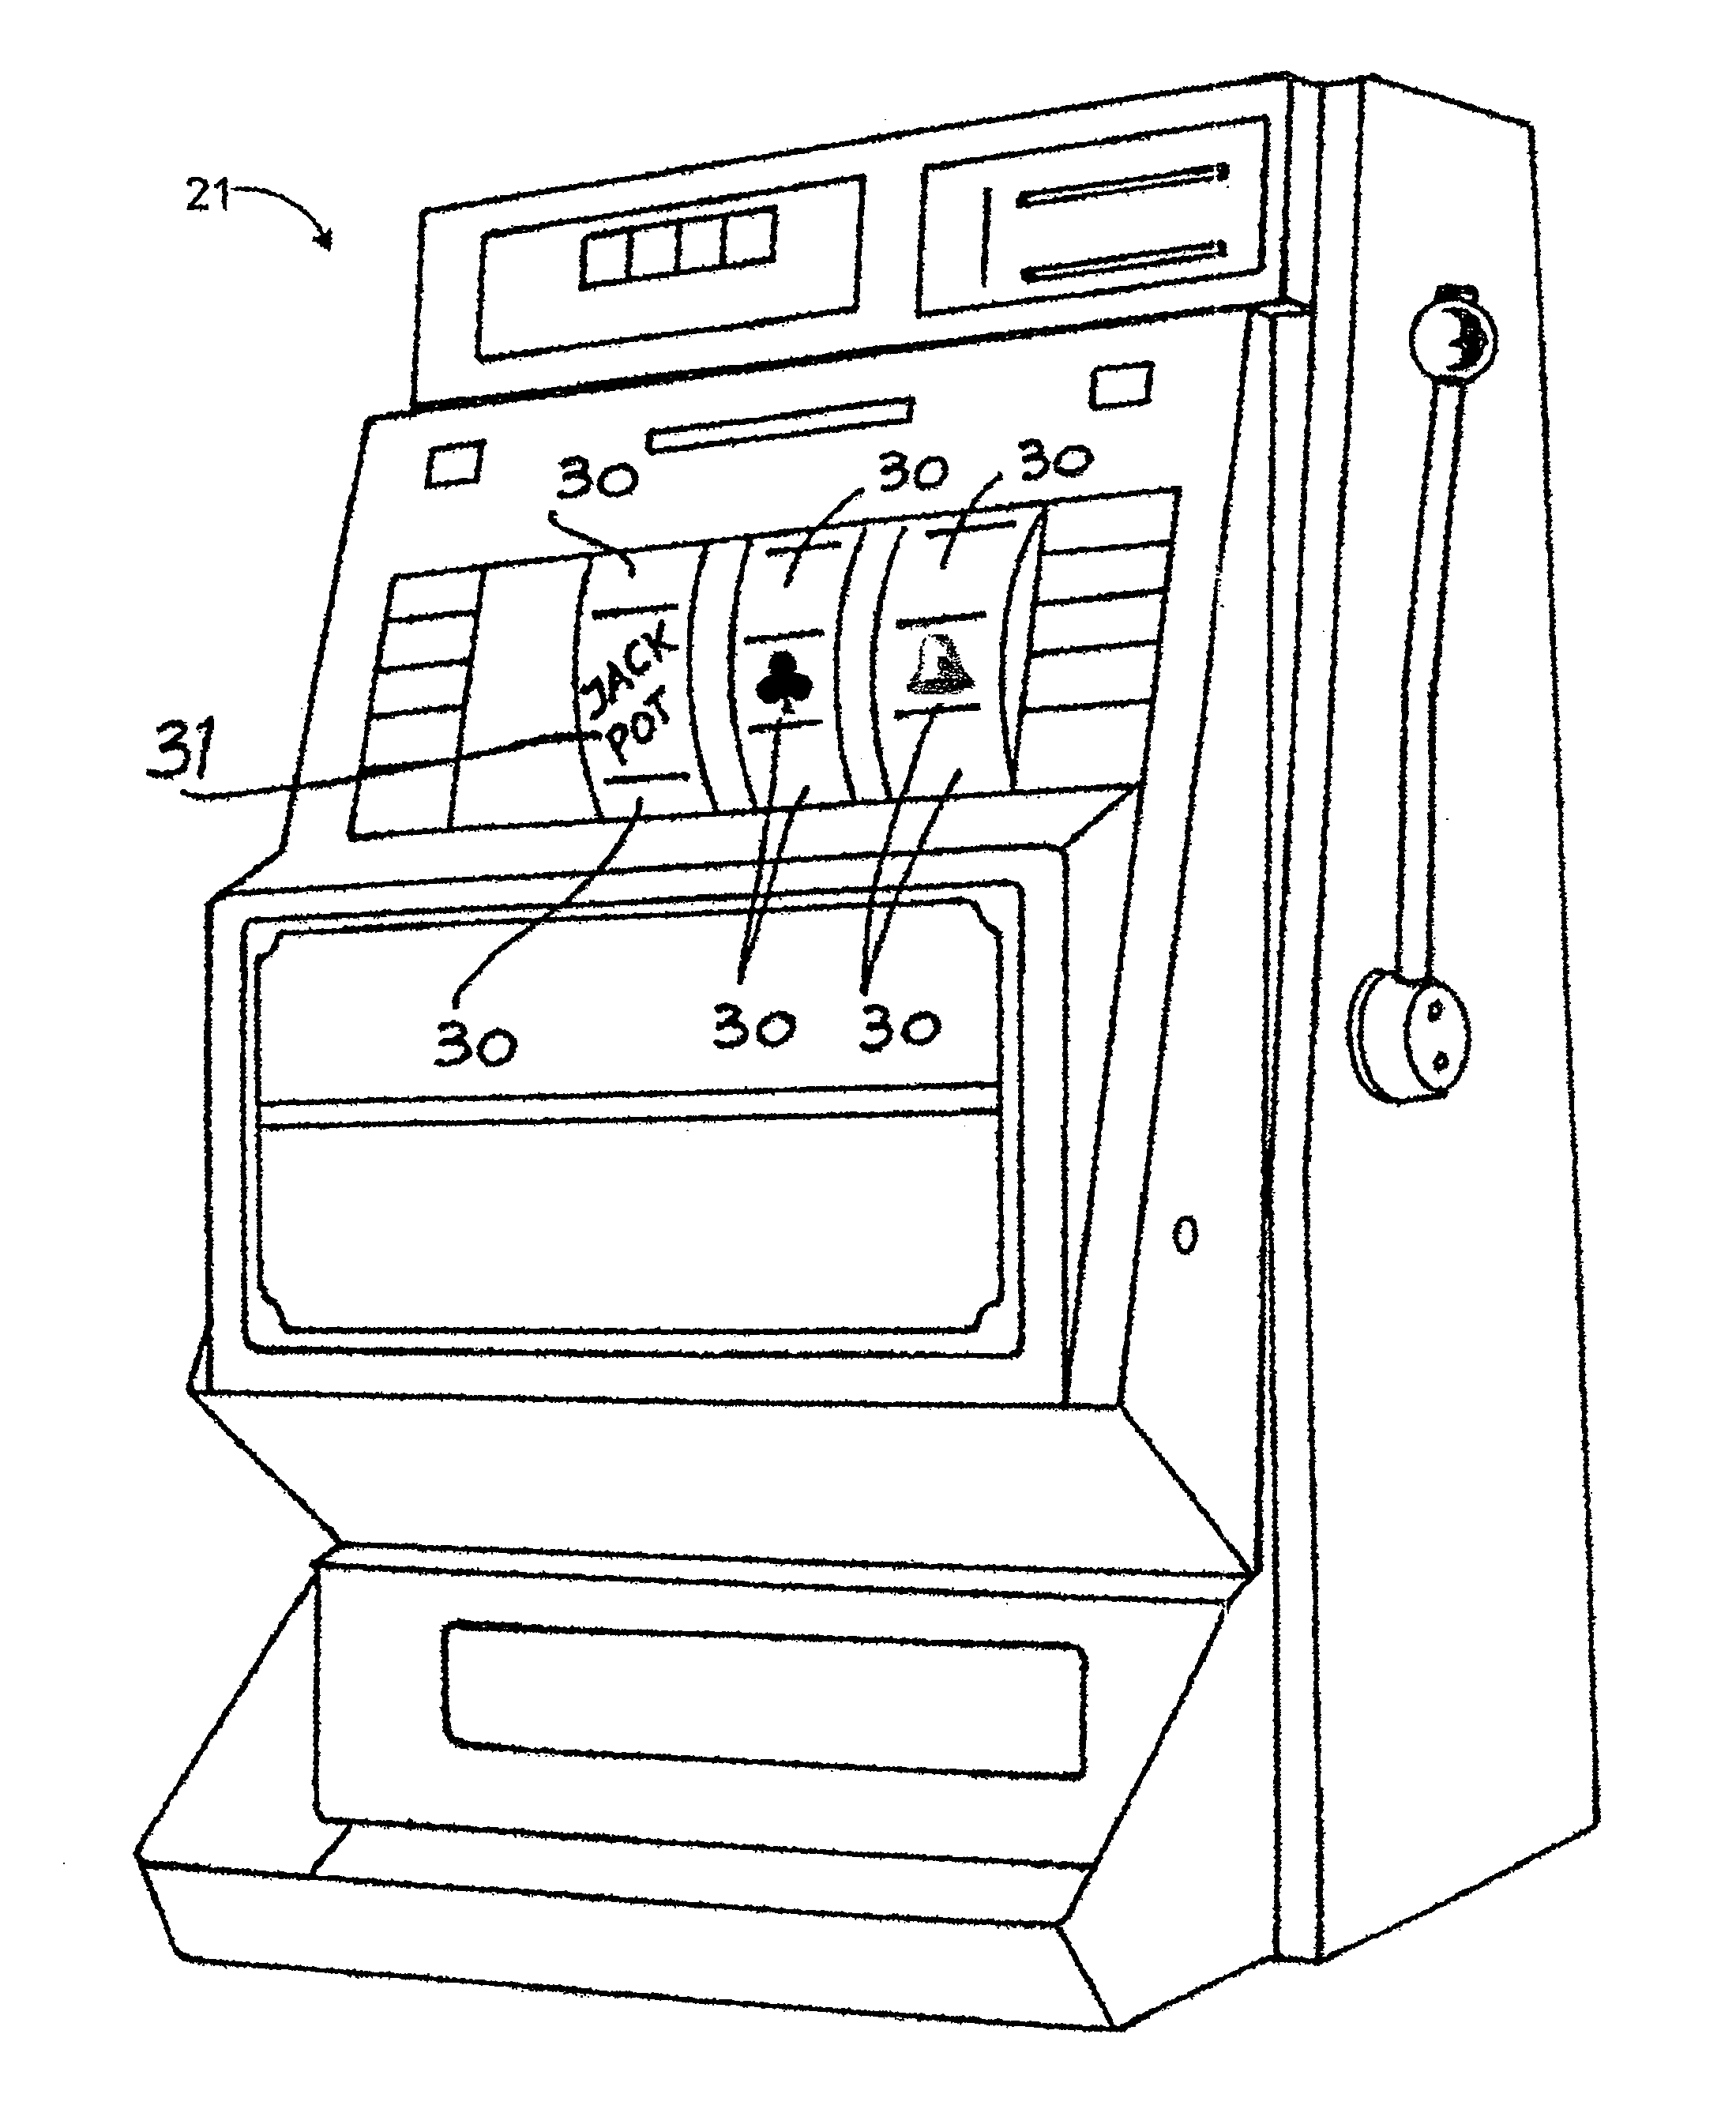 Method for providing gaming and a gaming device with electronically modifiable electro-mechanical reel displays